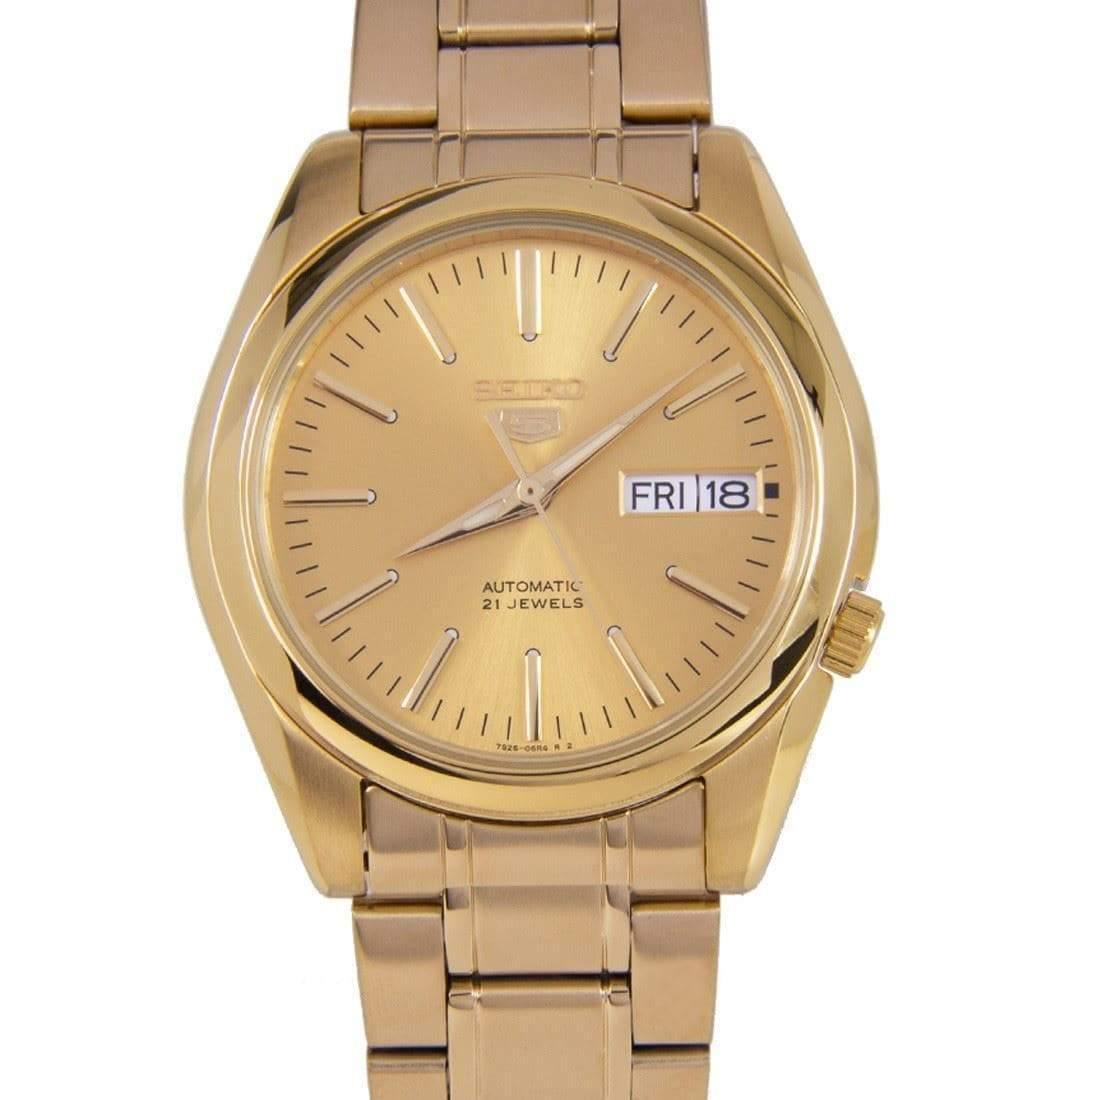 Seiko 5 Classic Men's Size Gold Dial & Plated Stainless Steel Strap Watch SNKL48K1 - Prestige